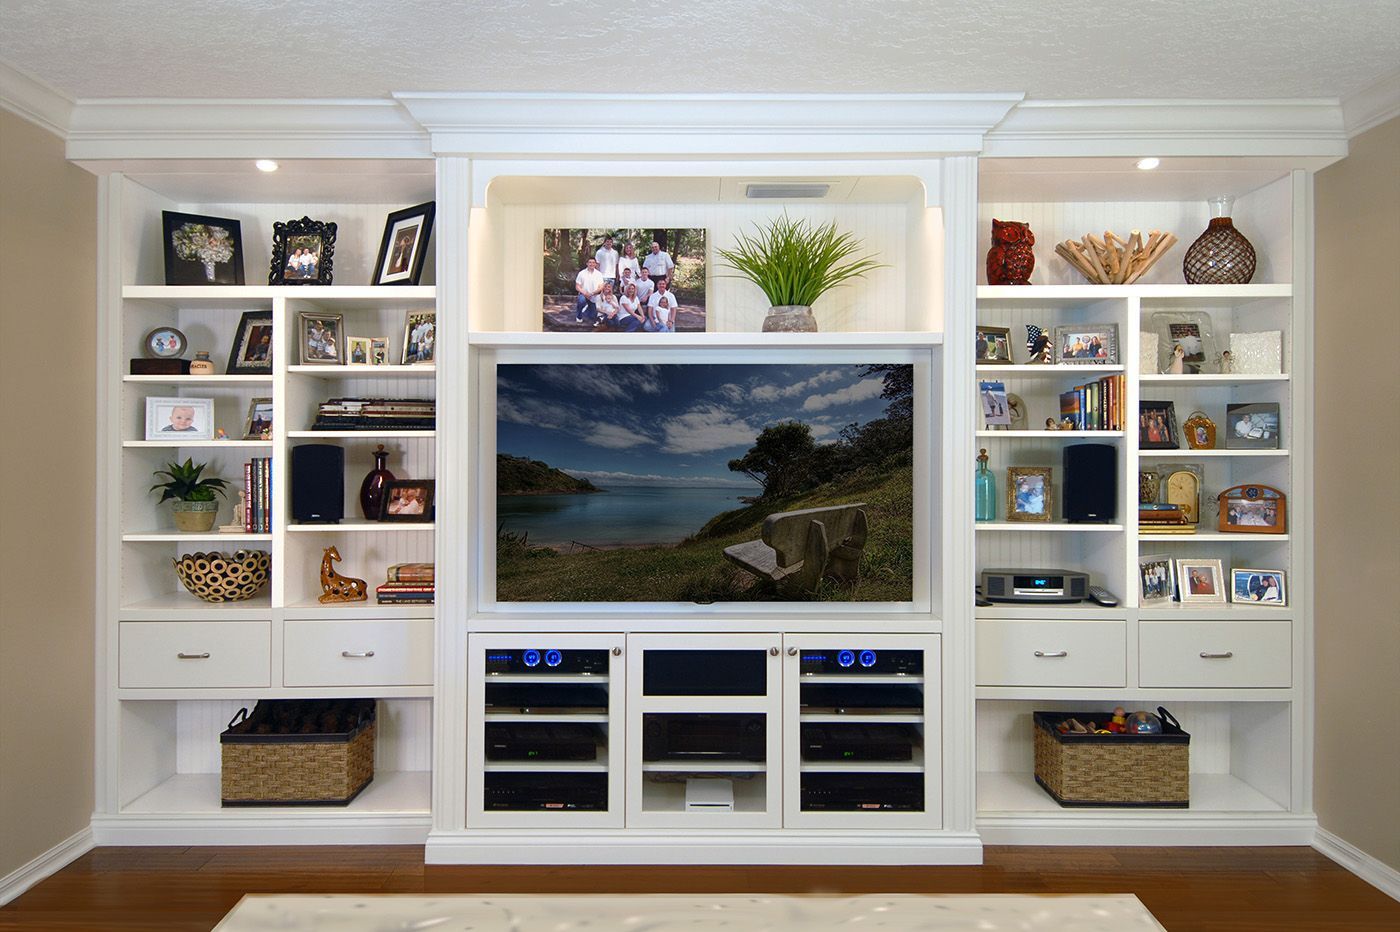 How To Build Wall Cabinets For Living Room